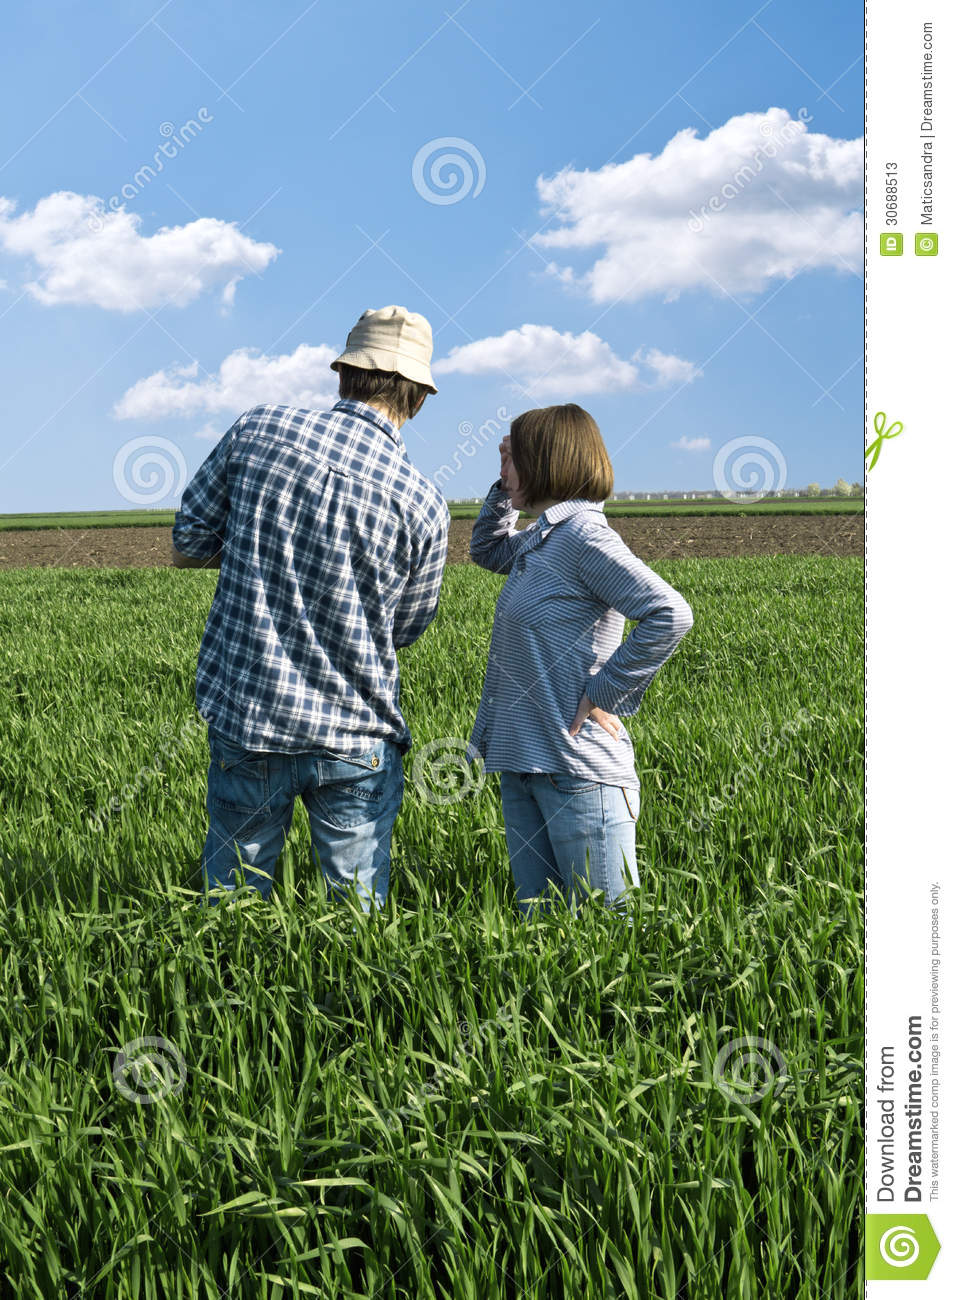 Two Farmers In A Wheat Field  Stock Photos   Image  30688513